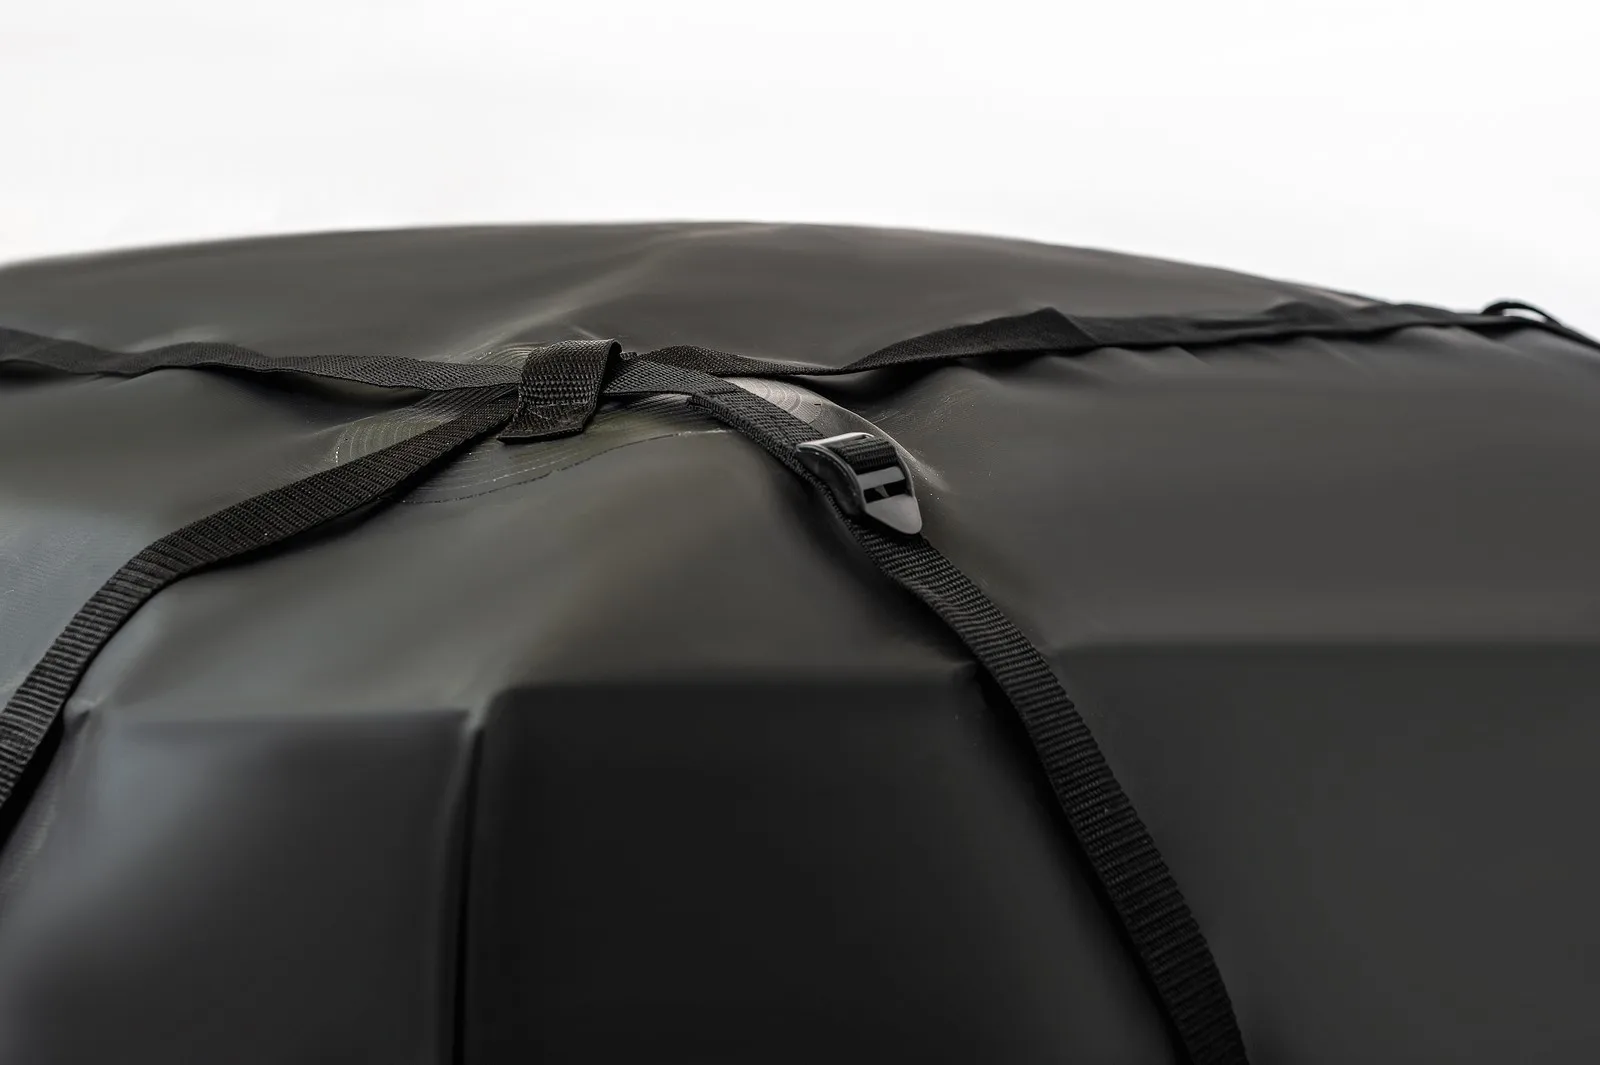 100% Waterproof Excellent Quality Soft-Sided Rain Proof Bag, Waterproof Car Accessories Contact us for Best Price